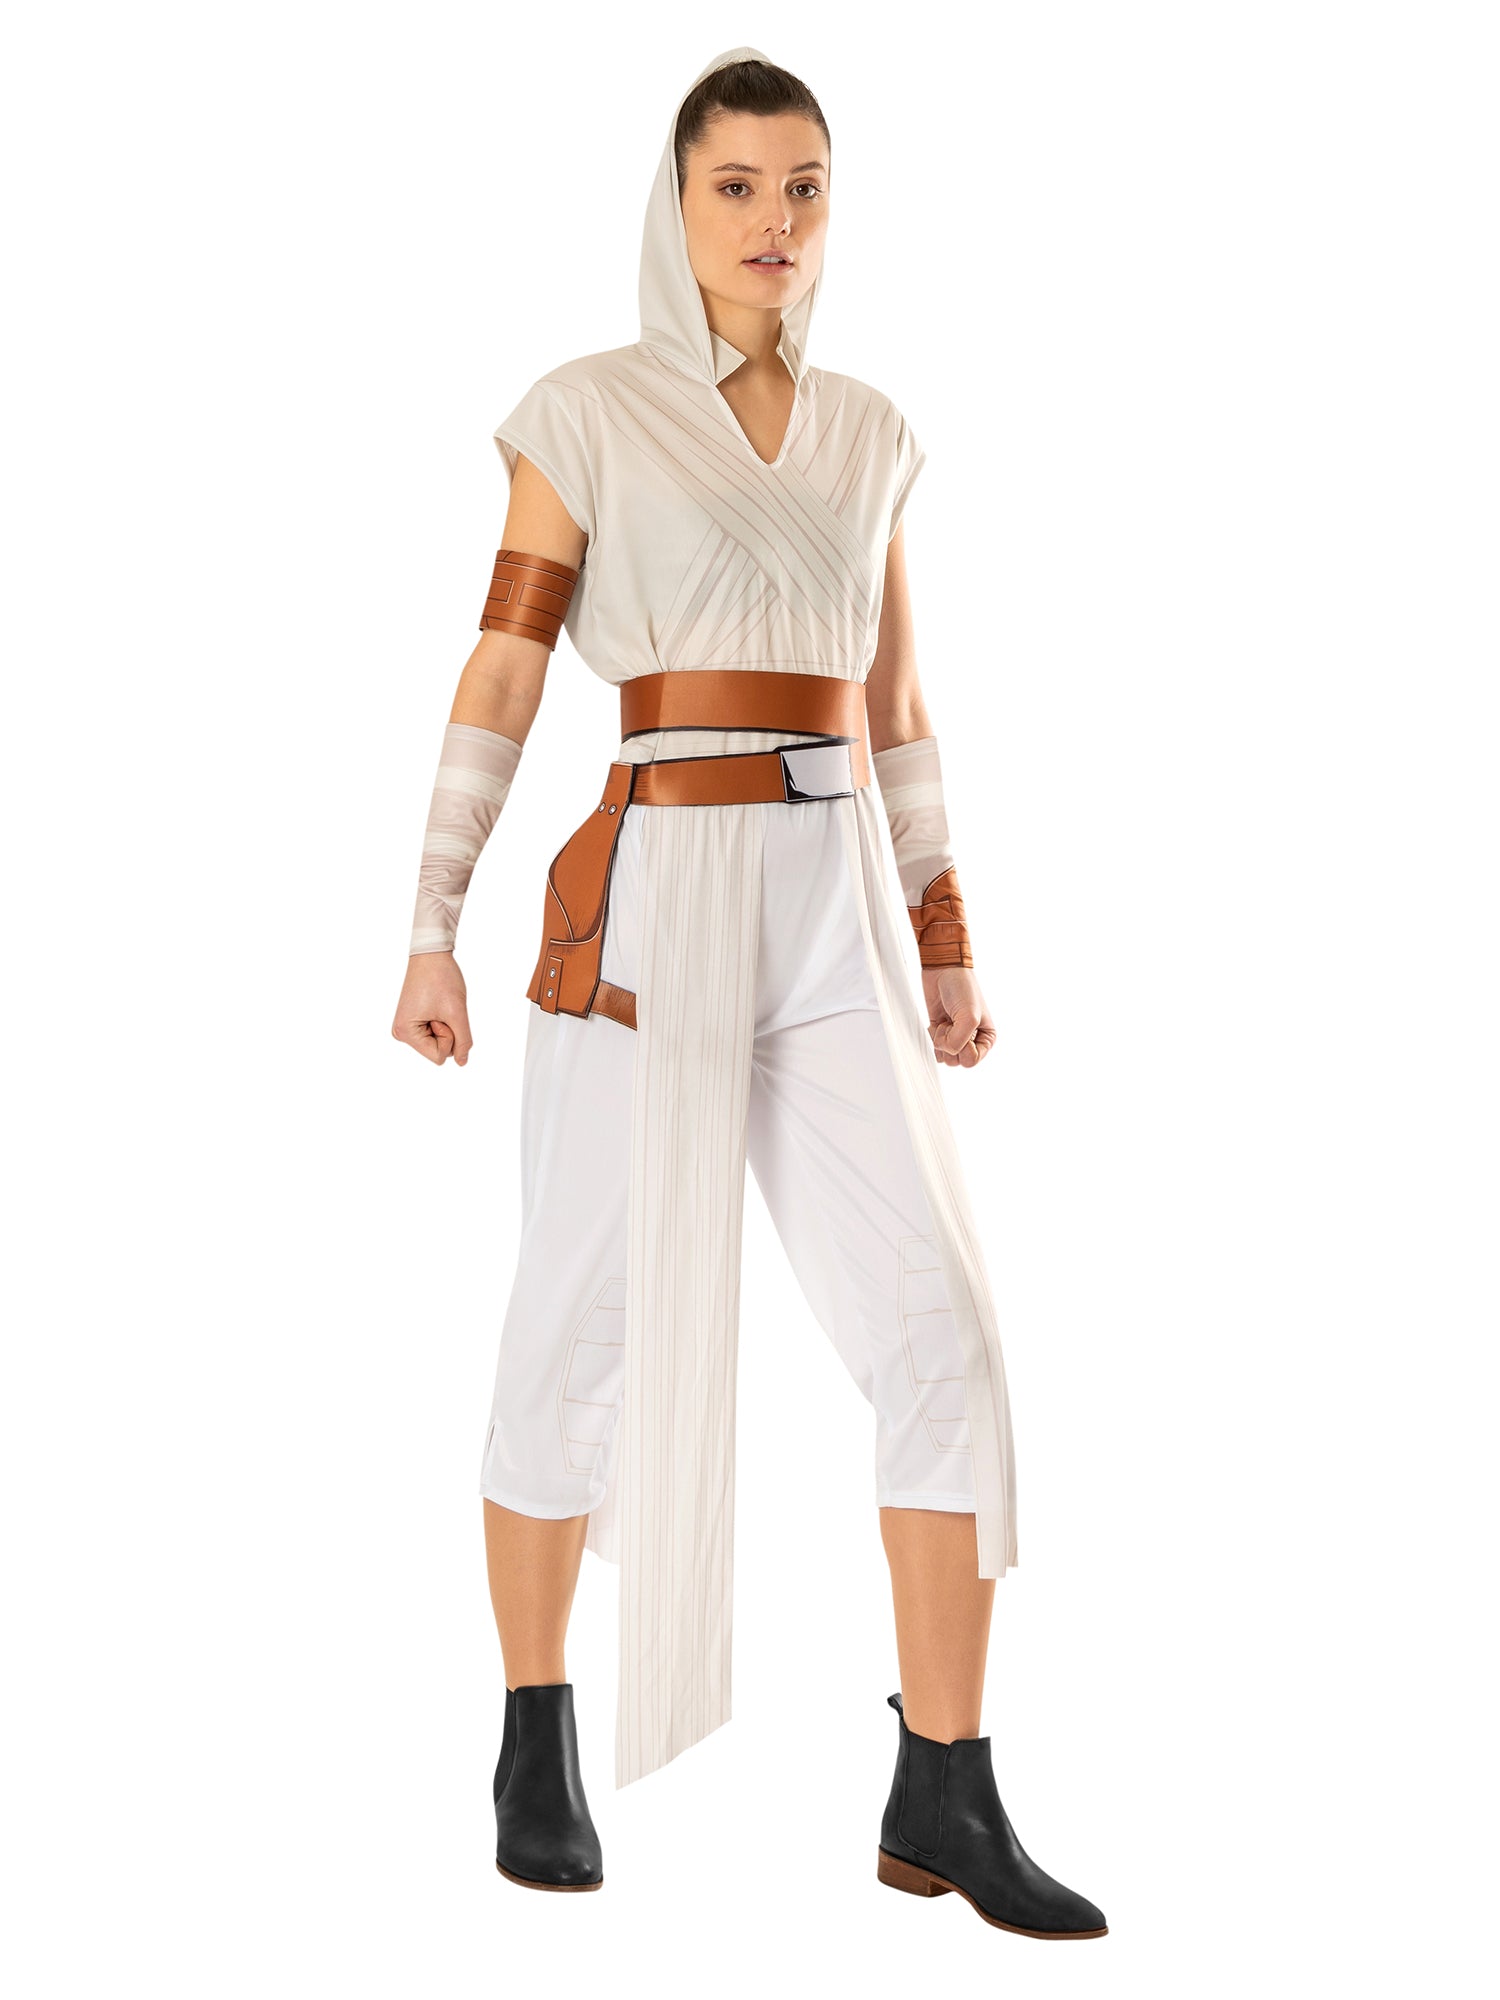 Rey, The Rise of Skywalker, Episode IX, The Rise of Skywalker, Multi, Star Wars, Adult Costume, , Other